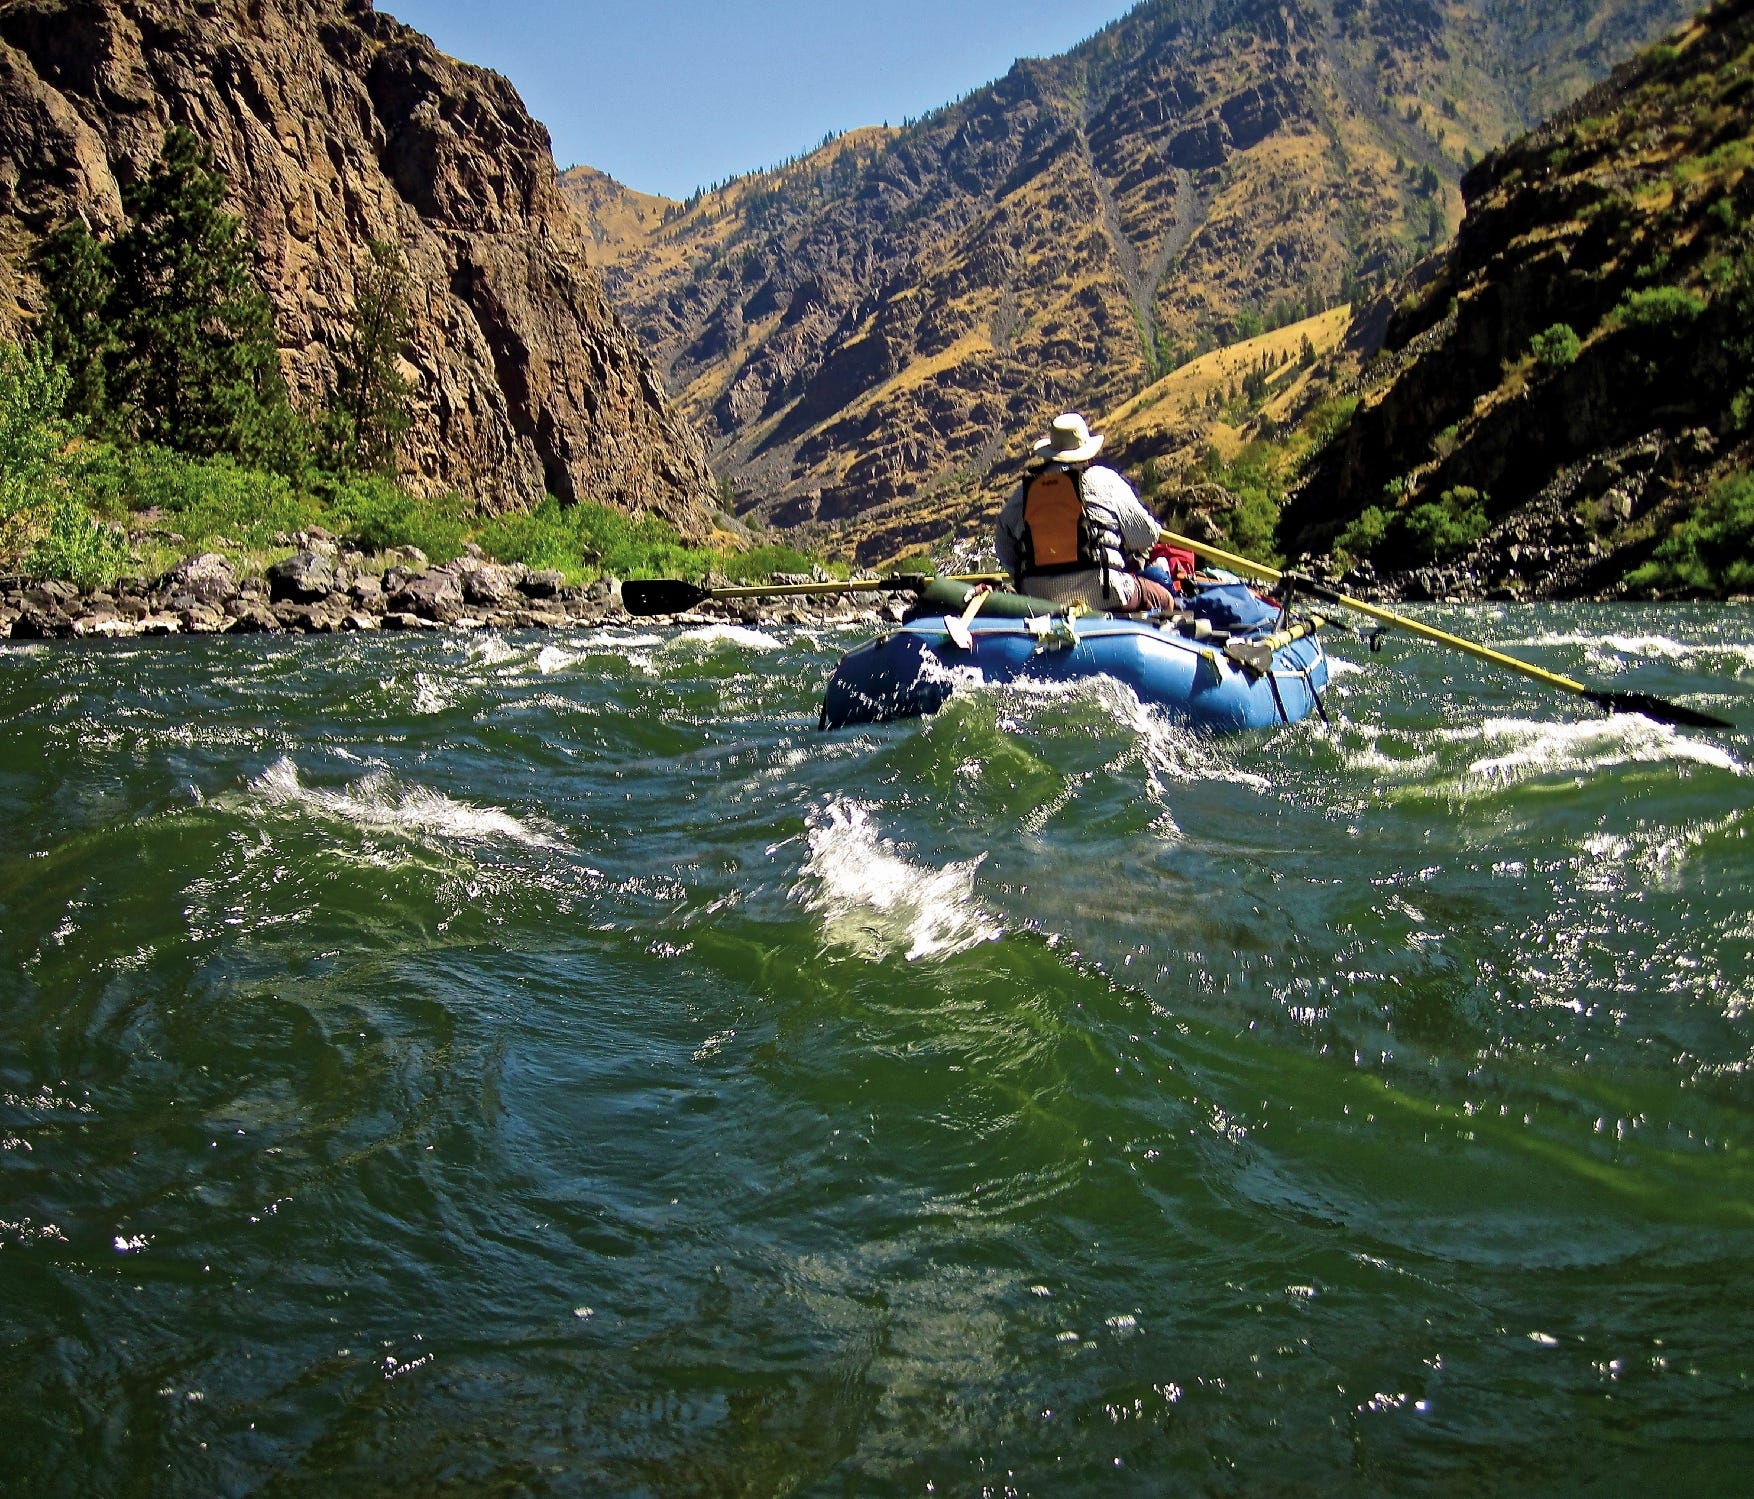 The Snake River trip through Hells Canyon includes supremely rugged landscape and one of the deepest canyons in the country.